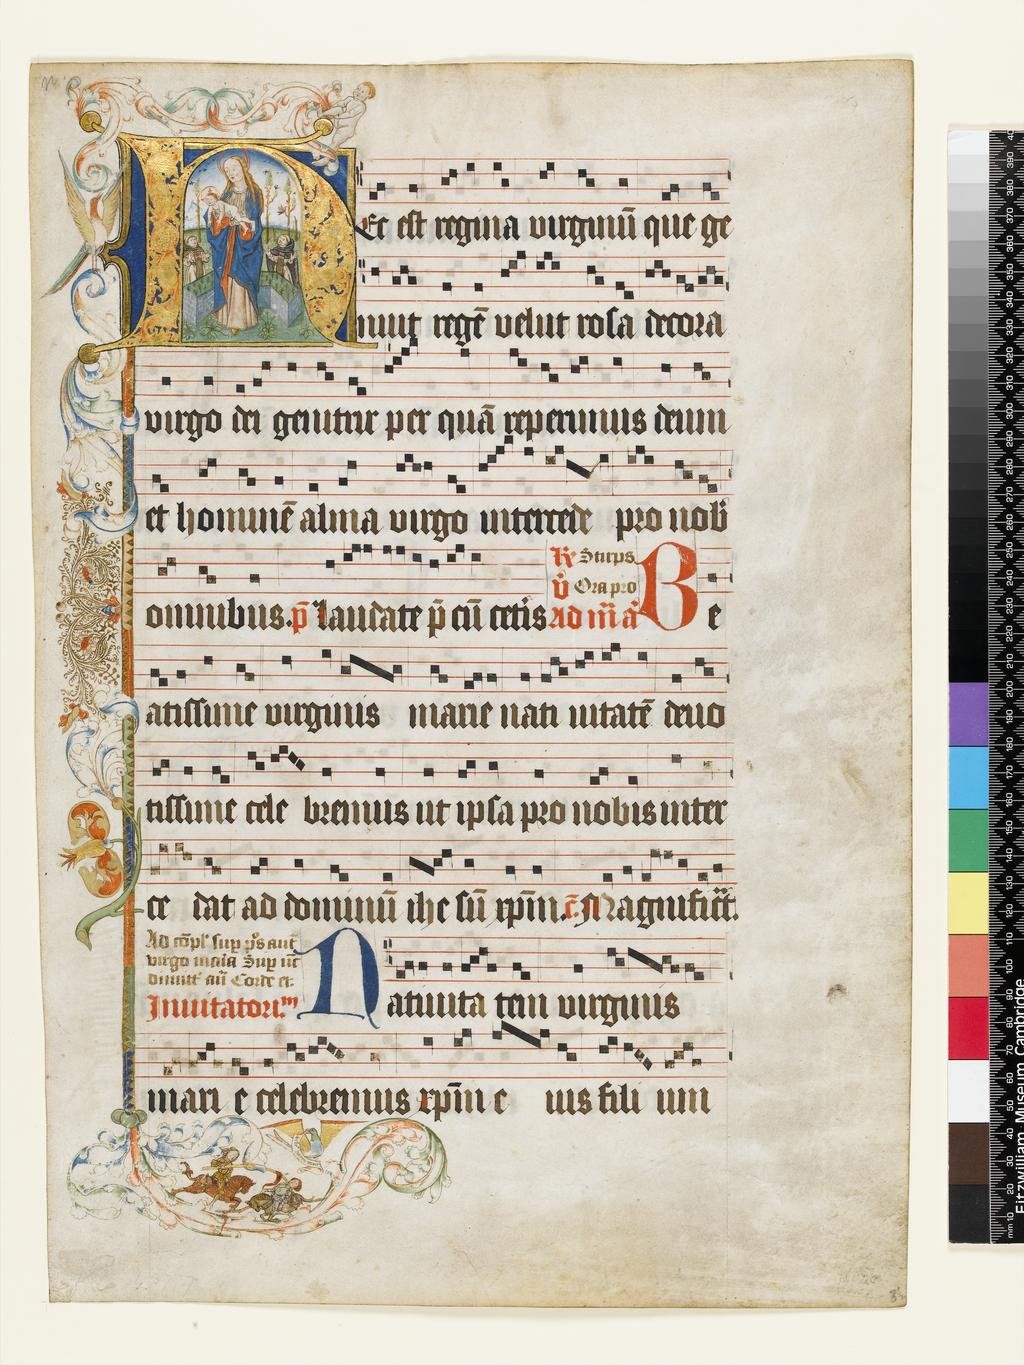 An image of Illuminated Manuscript. Cutting. Leaf from an Antiphonal. Production Place: Germany, probably Cologne. Augustinian Use of the Order of the Holy Cross. Parchment, gold, 450 x 310 (345 x 209) mm, 10 lines of text ruled in faint brown ink and 10 four-line musical staves ruled in red ink, circa 1510 to circa 1520.CONTENTS: Antiphon for the Nativity of the Virgin, Hec est regina virginum. DECORATION: Historiated initial [H, 2 ll.] formed of gold acanthus on blue ground, Virgin and Child in enclosed garden venerated by two brothers of the Order of the Holy Cross, bar-border with foliage and acanthus extensions, a putto, tournament scene, and bird with scroll inscribed ‘gelr hogen moit’. ORNAMENTATION: Alternate red and blue one-line penwork initials. Provenance: made for a house of the Order of the Holy Cross, probably St Cornelius at Roermond, Limburg.